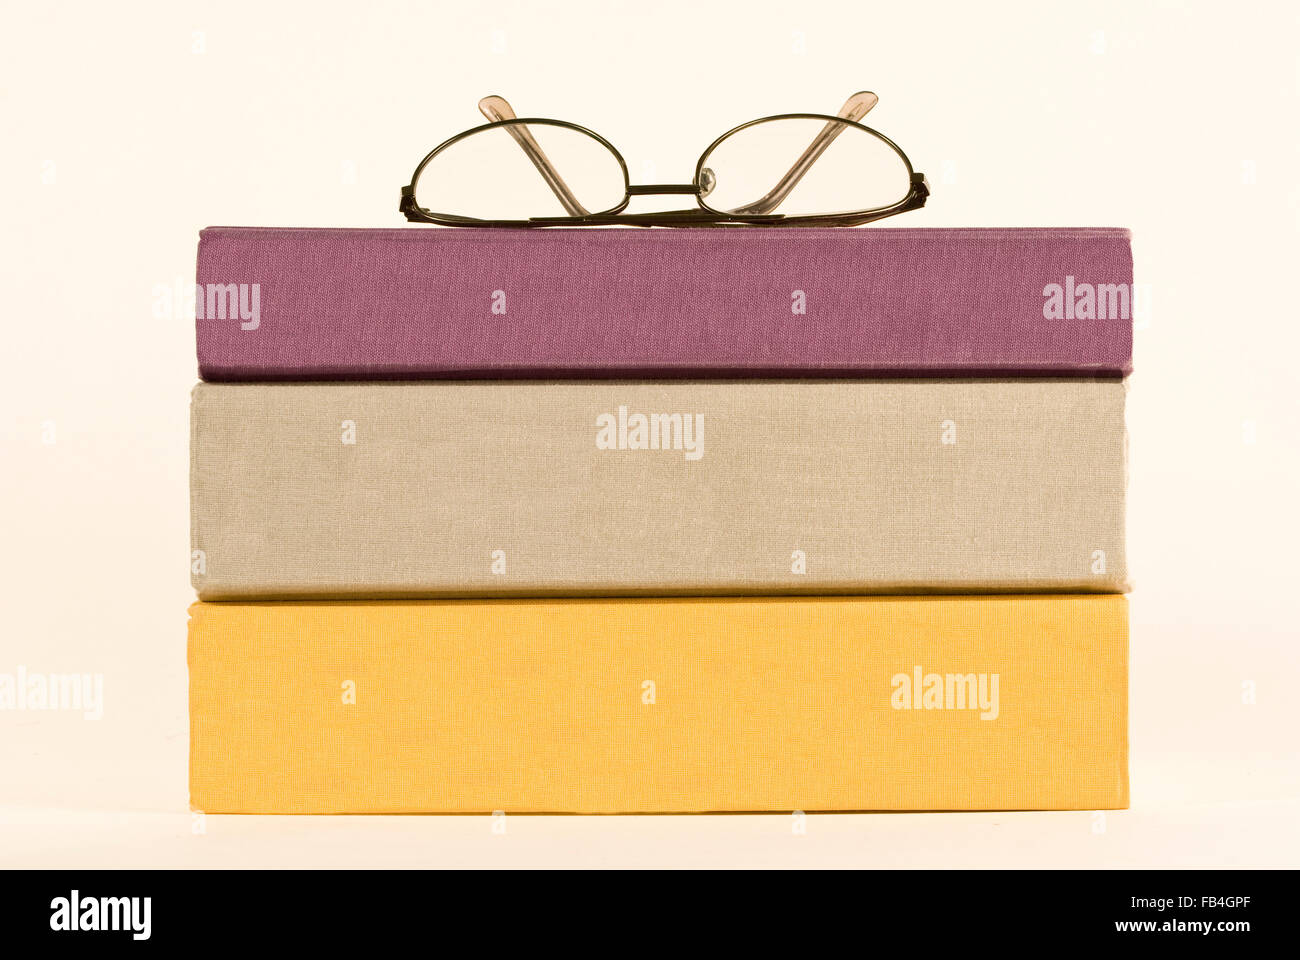 Three Stacked Books With Blank Spines and a Pair of Glasses on Top Stock Photo